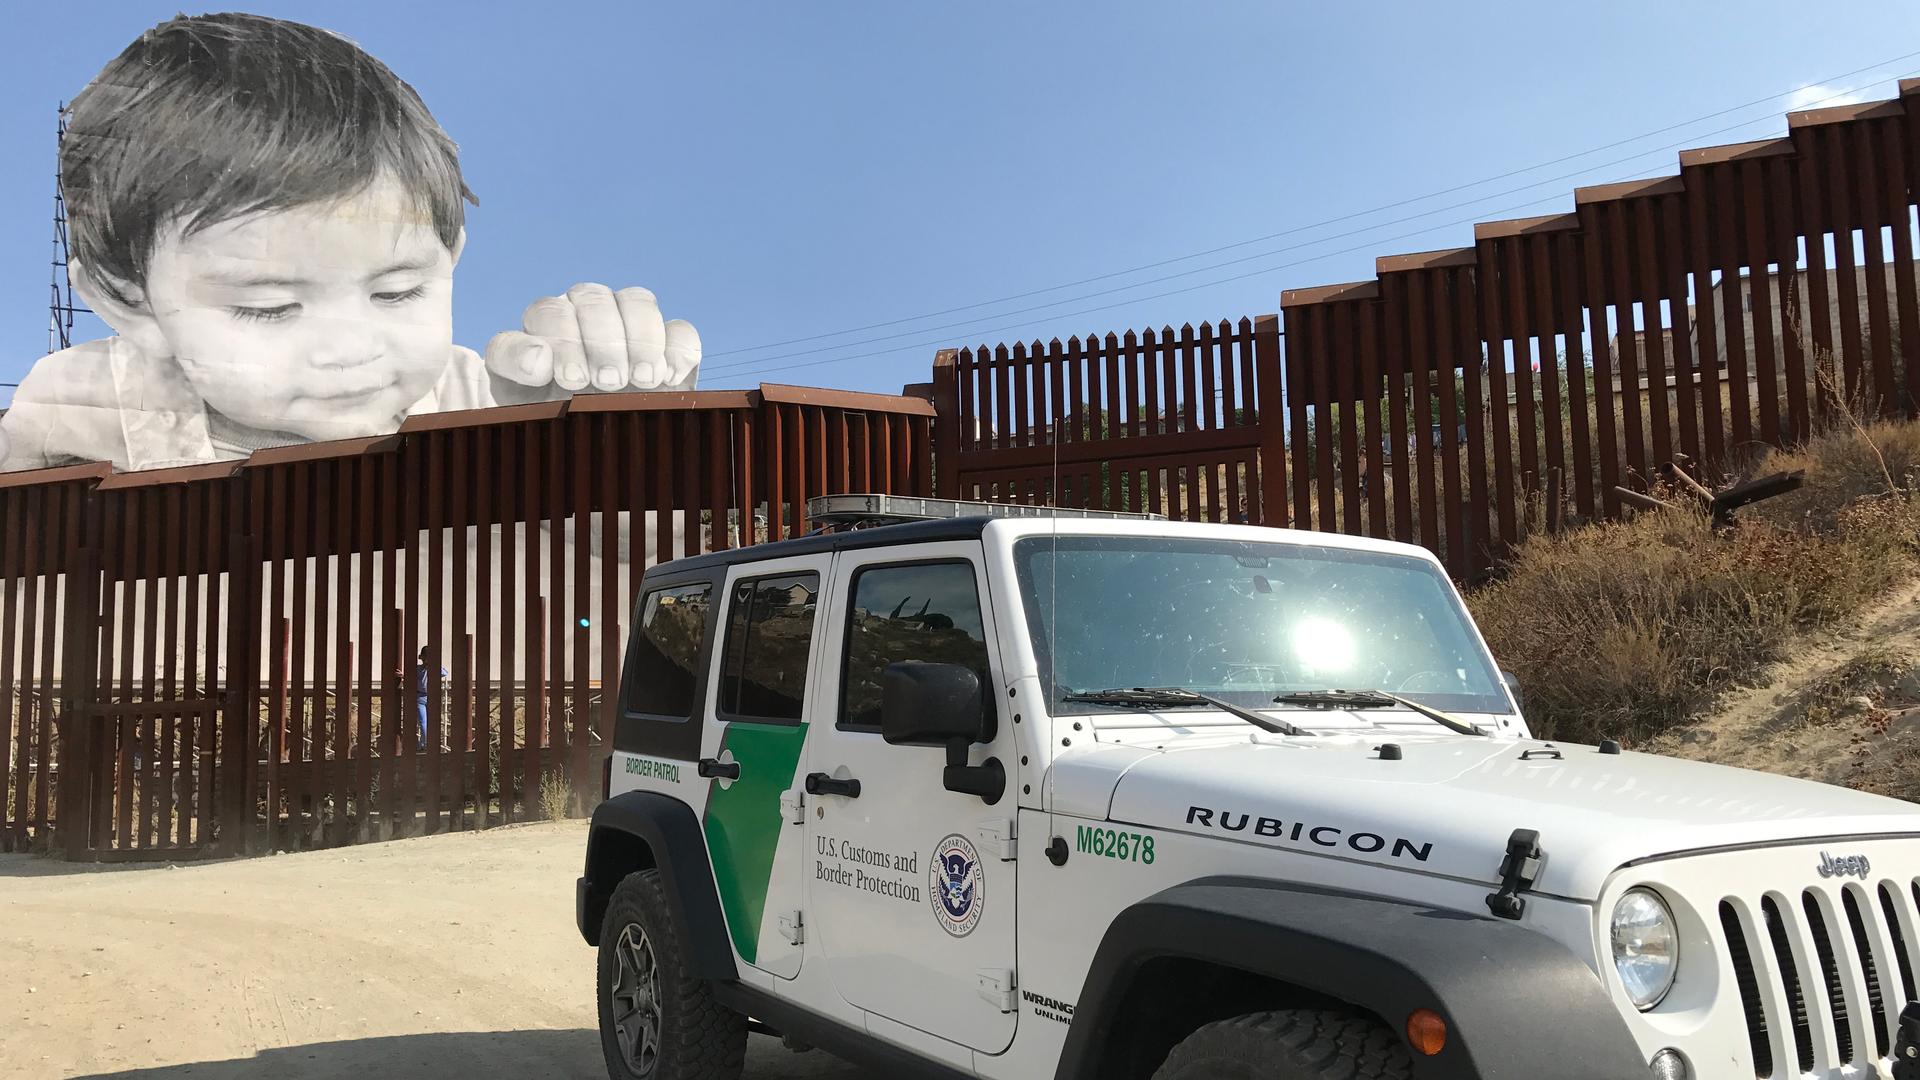 Large photo installed on one side of metal fencing looks out over Border Patrol SUV